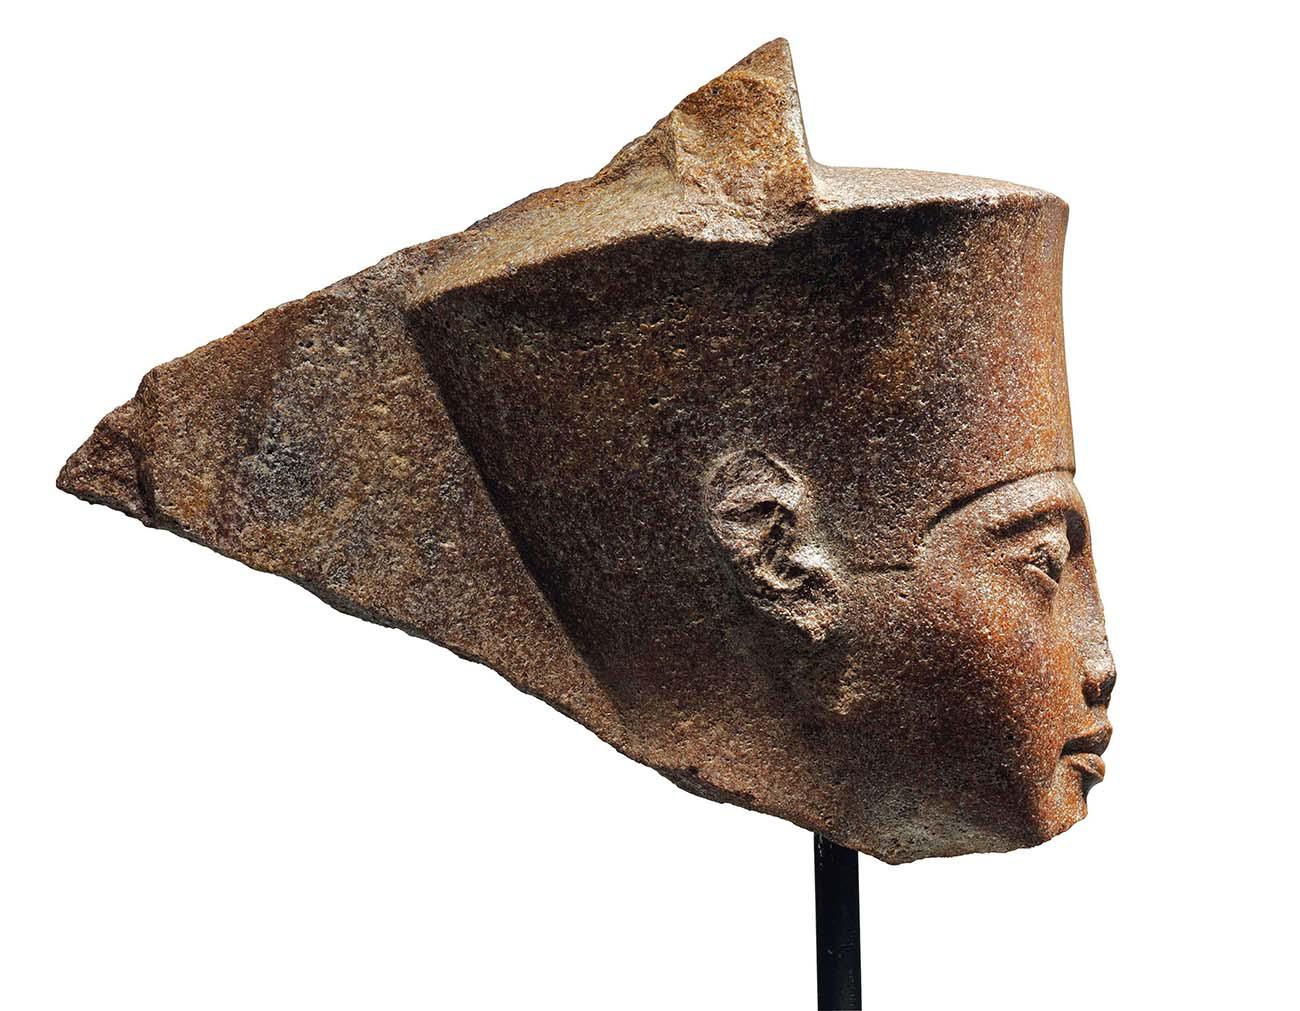 Egypt was never able to provide evidence for the Tutankhamun bust being illegally obtained